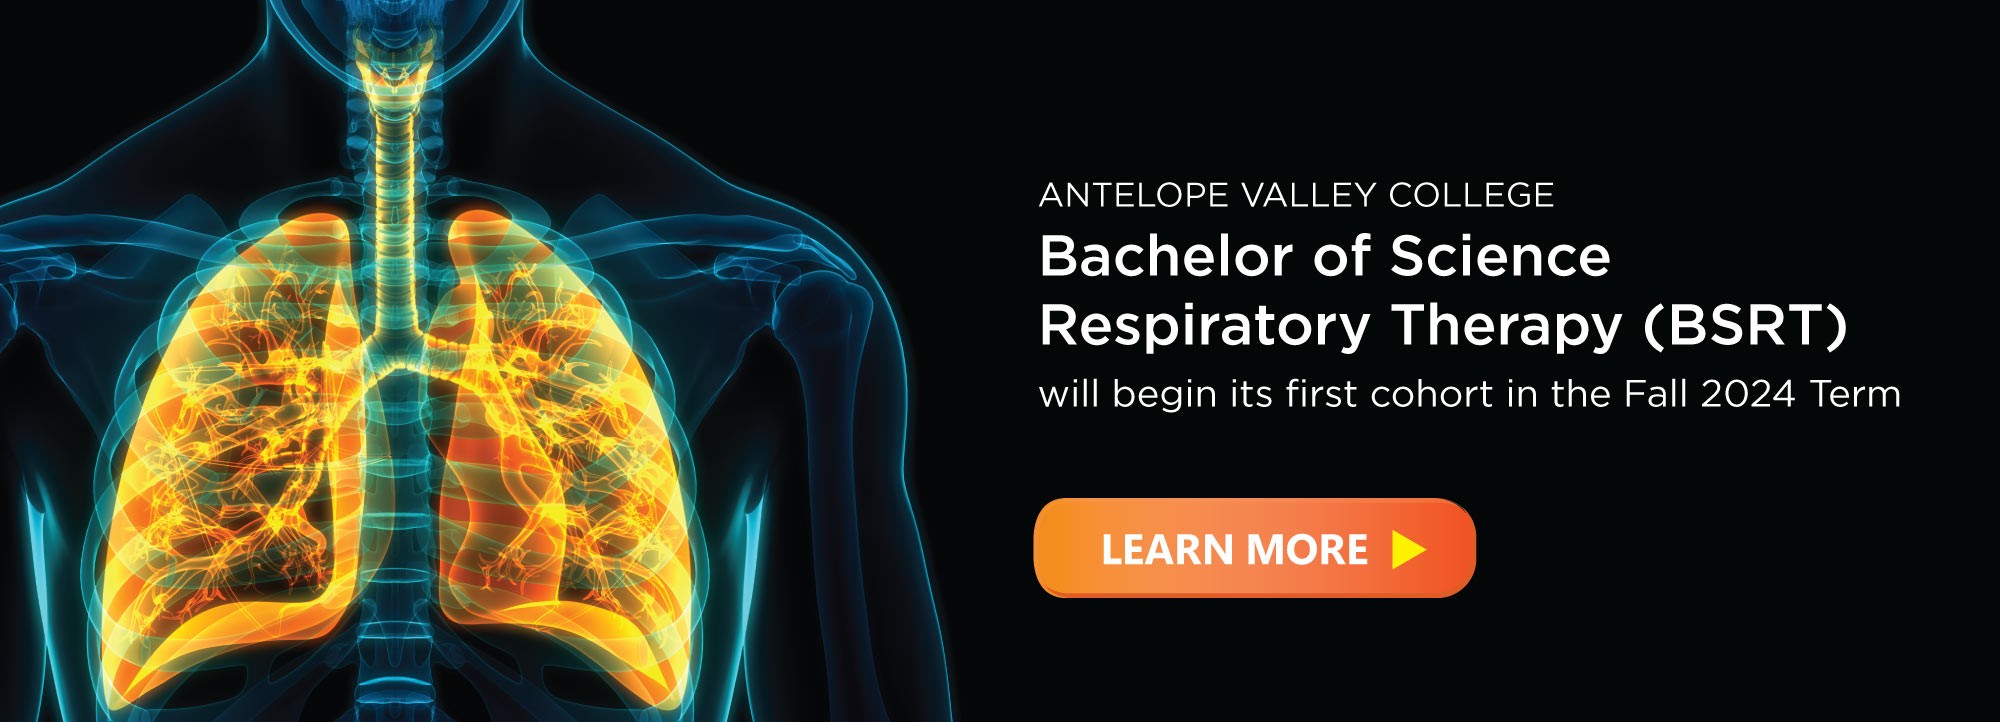 Bachelor of Science Respiratory Therapy will Begin in Fall 2024